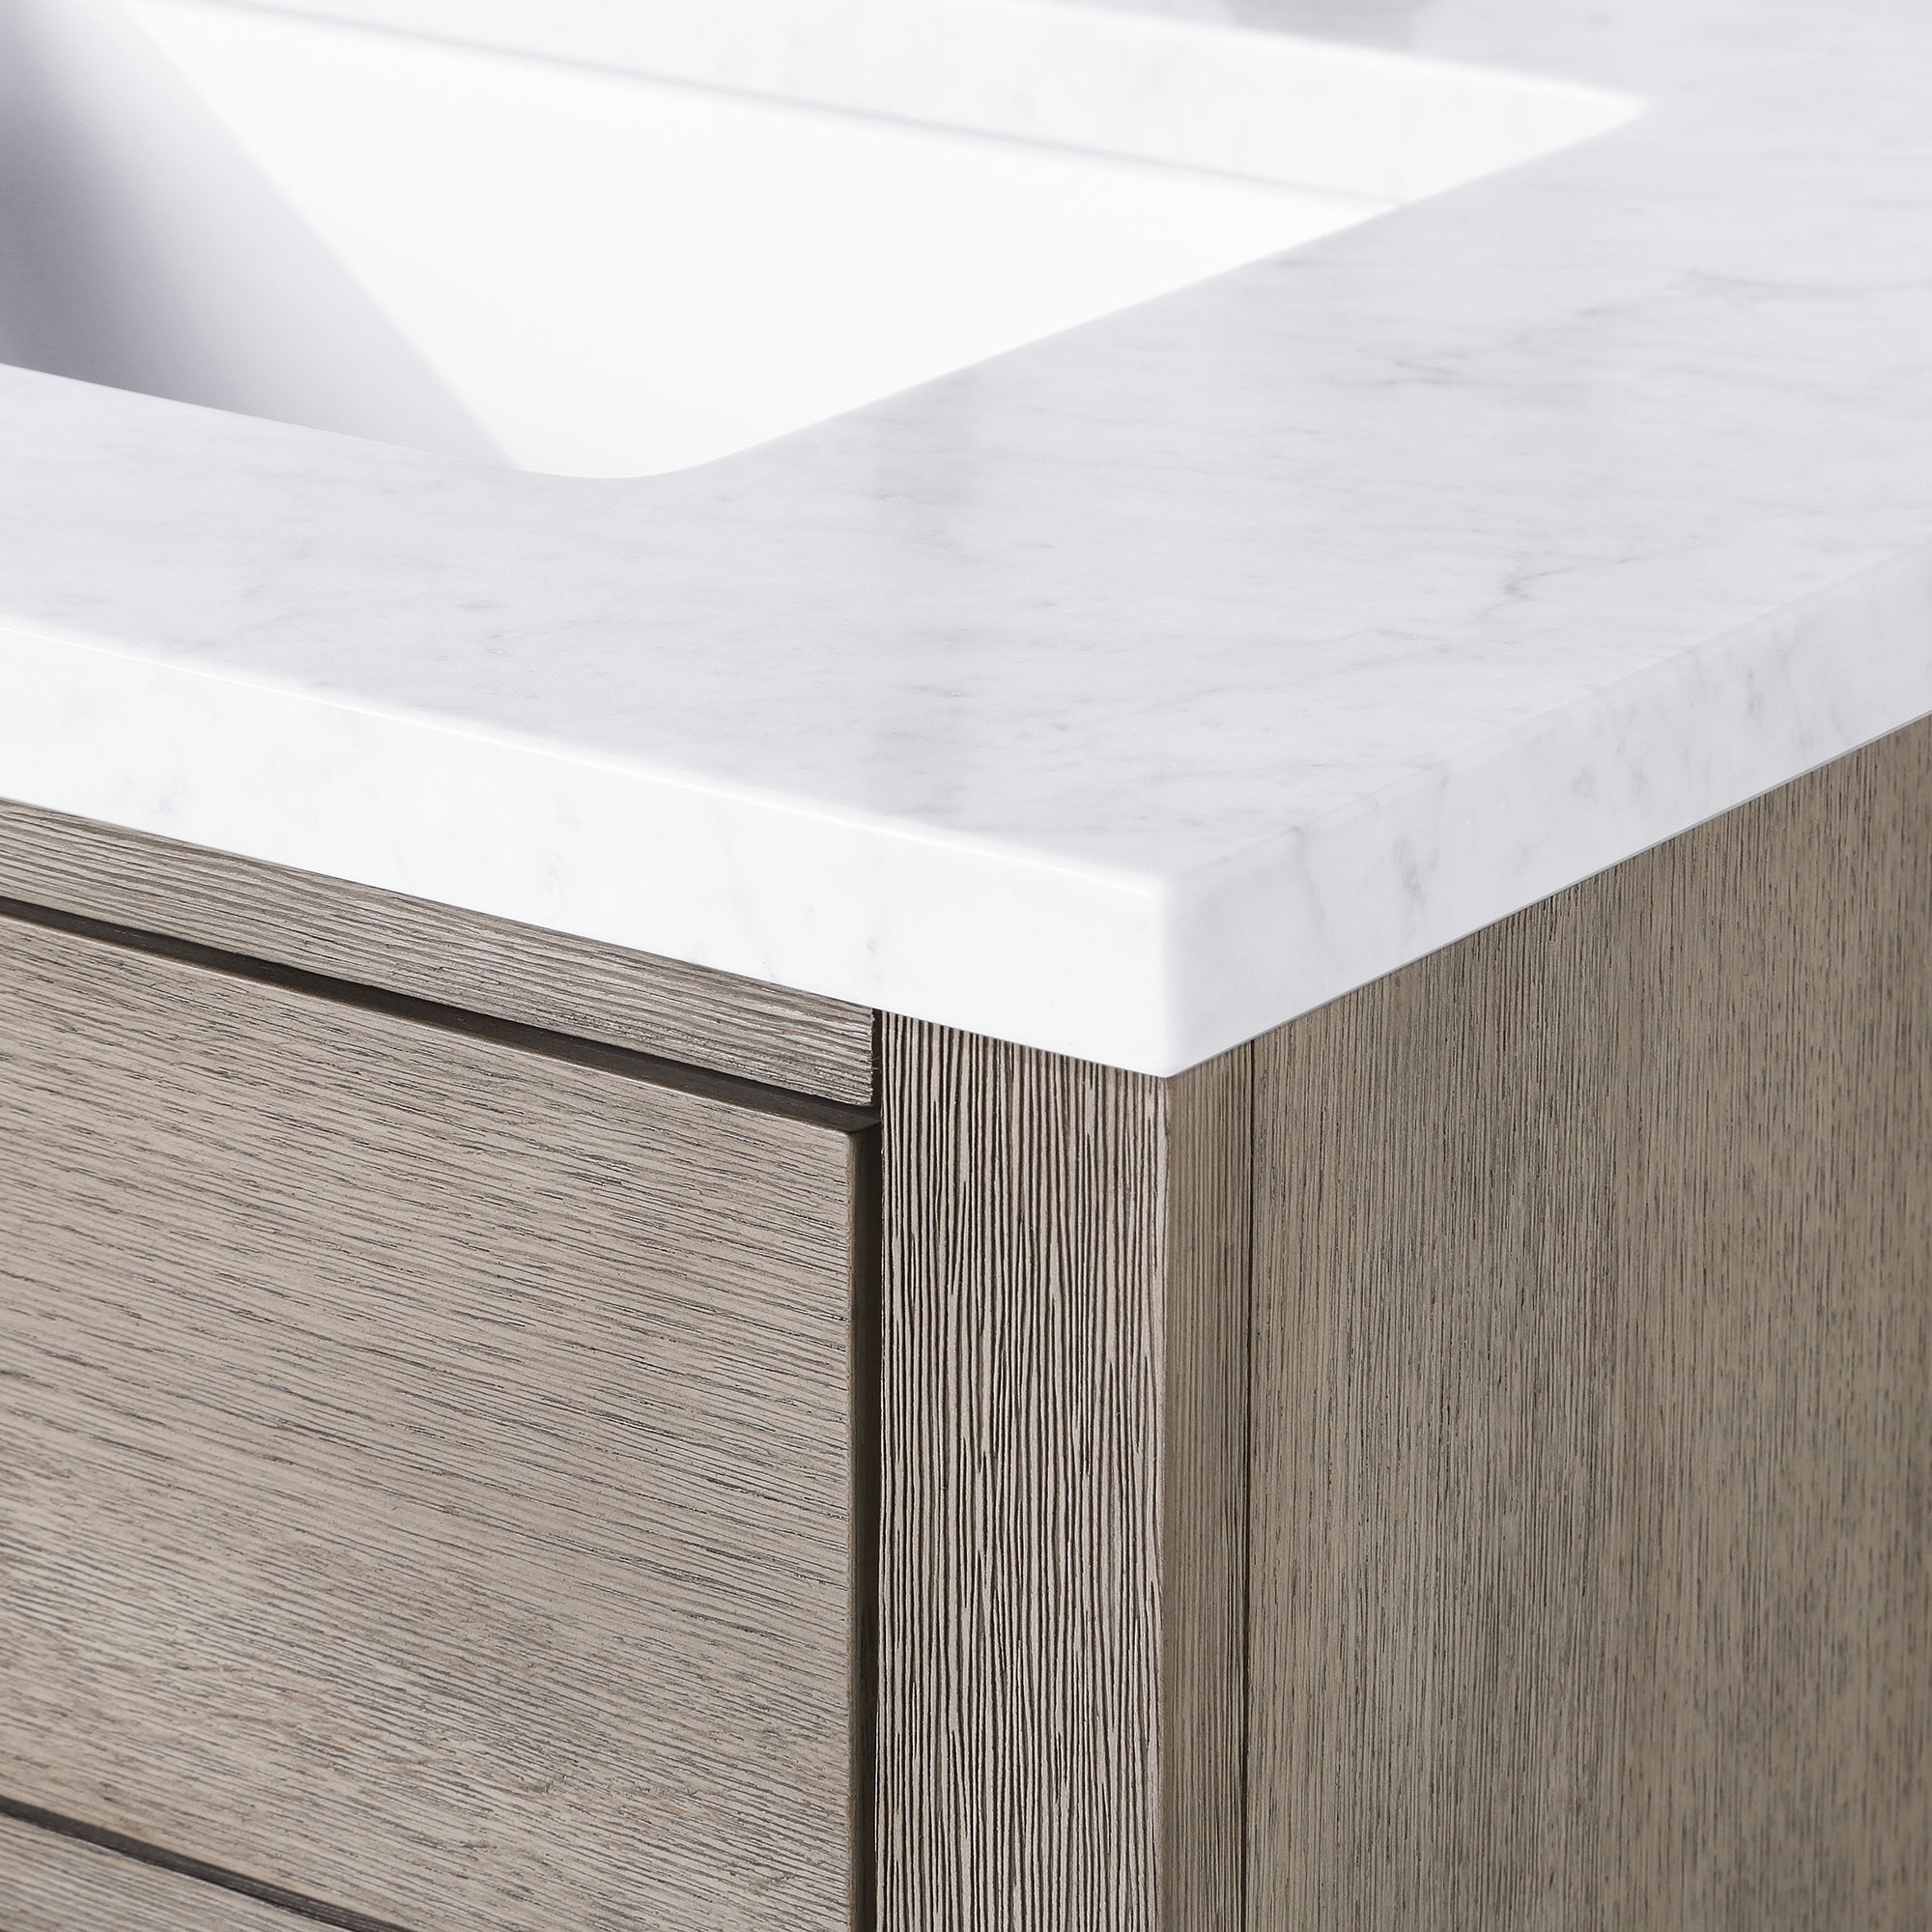 Water Creation | Chestnut 72 In. Double Sink Carrara White Marble Countertop Vanity In Grey Oak with Mirrors | CH72CW03GK-R21000000